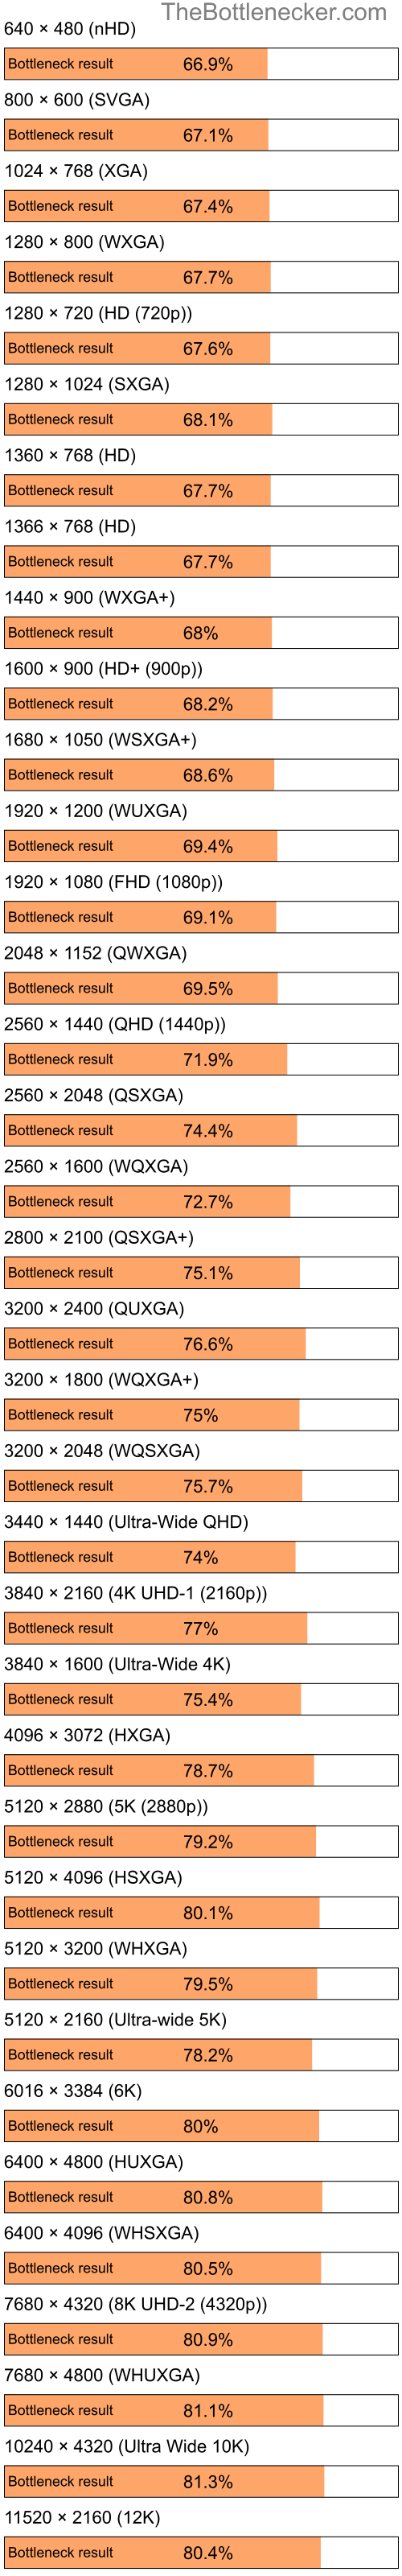 Bottleneck results by resolution for Intel Pentium 4 and AMD M860G with Mobility Radeon 4100 in General Tasks